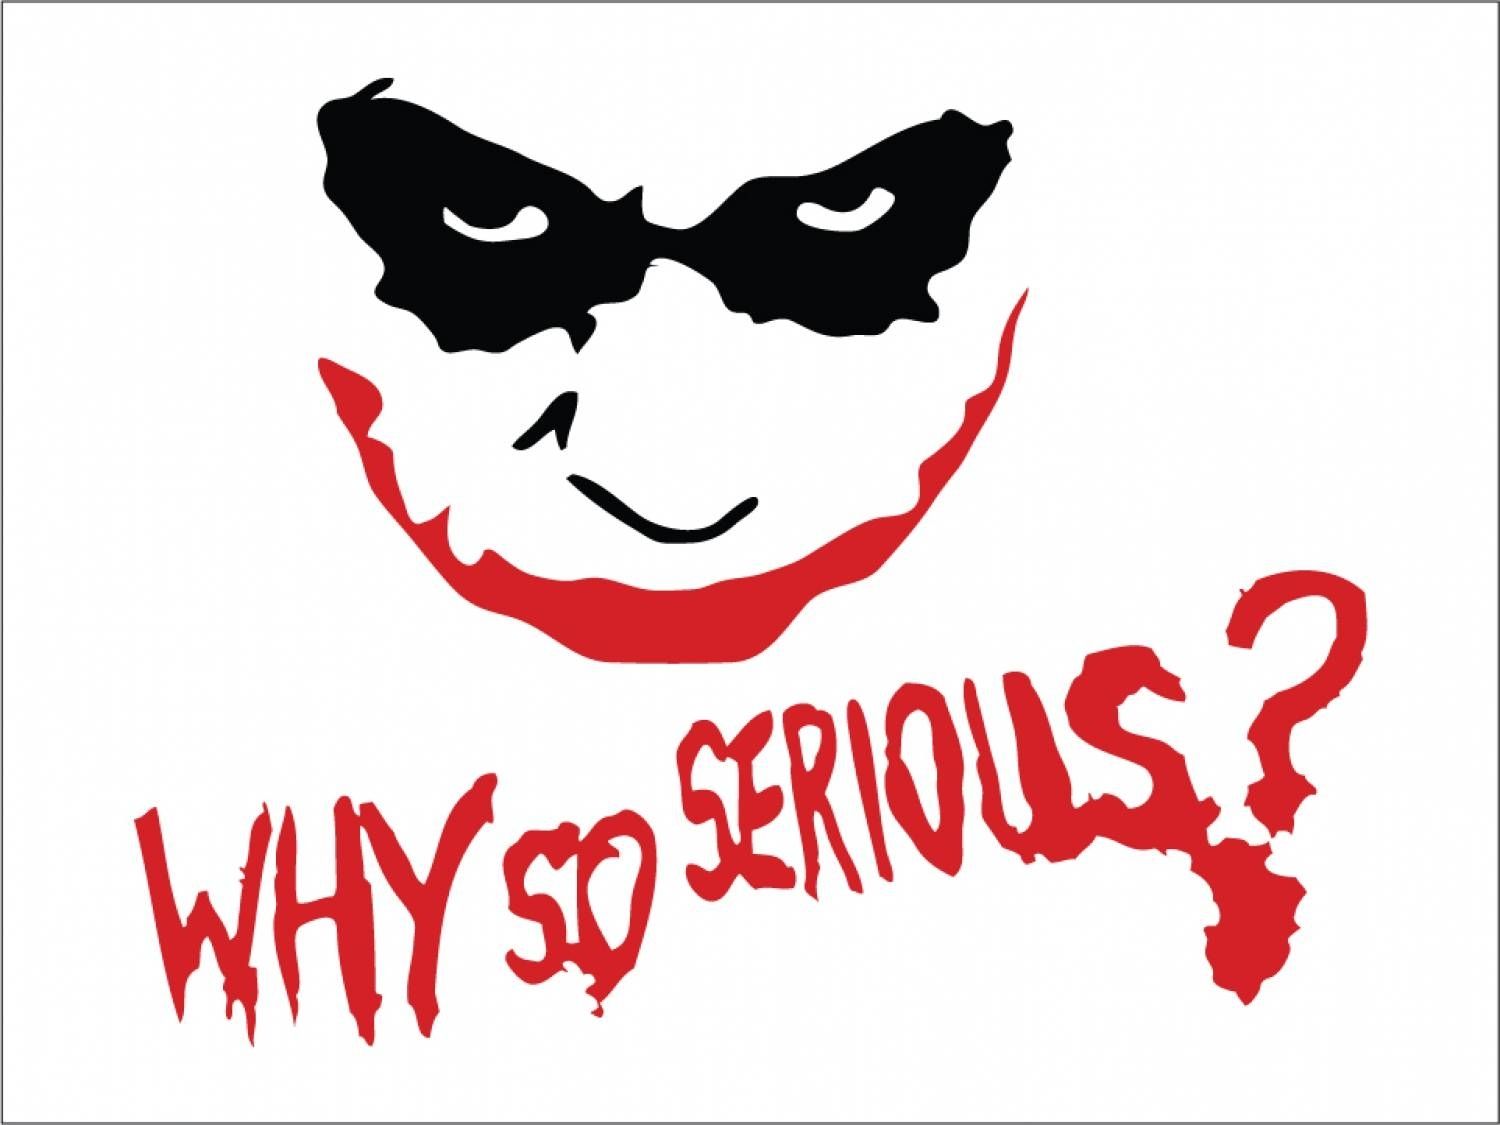 Best Why So Serious Logo FULL HD 1080p For PC Background. Joker stencil, Why so serious tattoo, Joker tattoo design